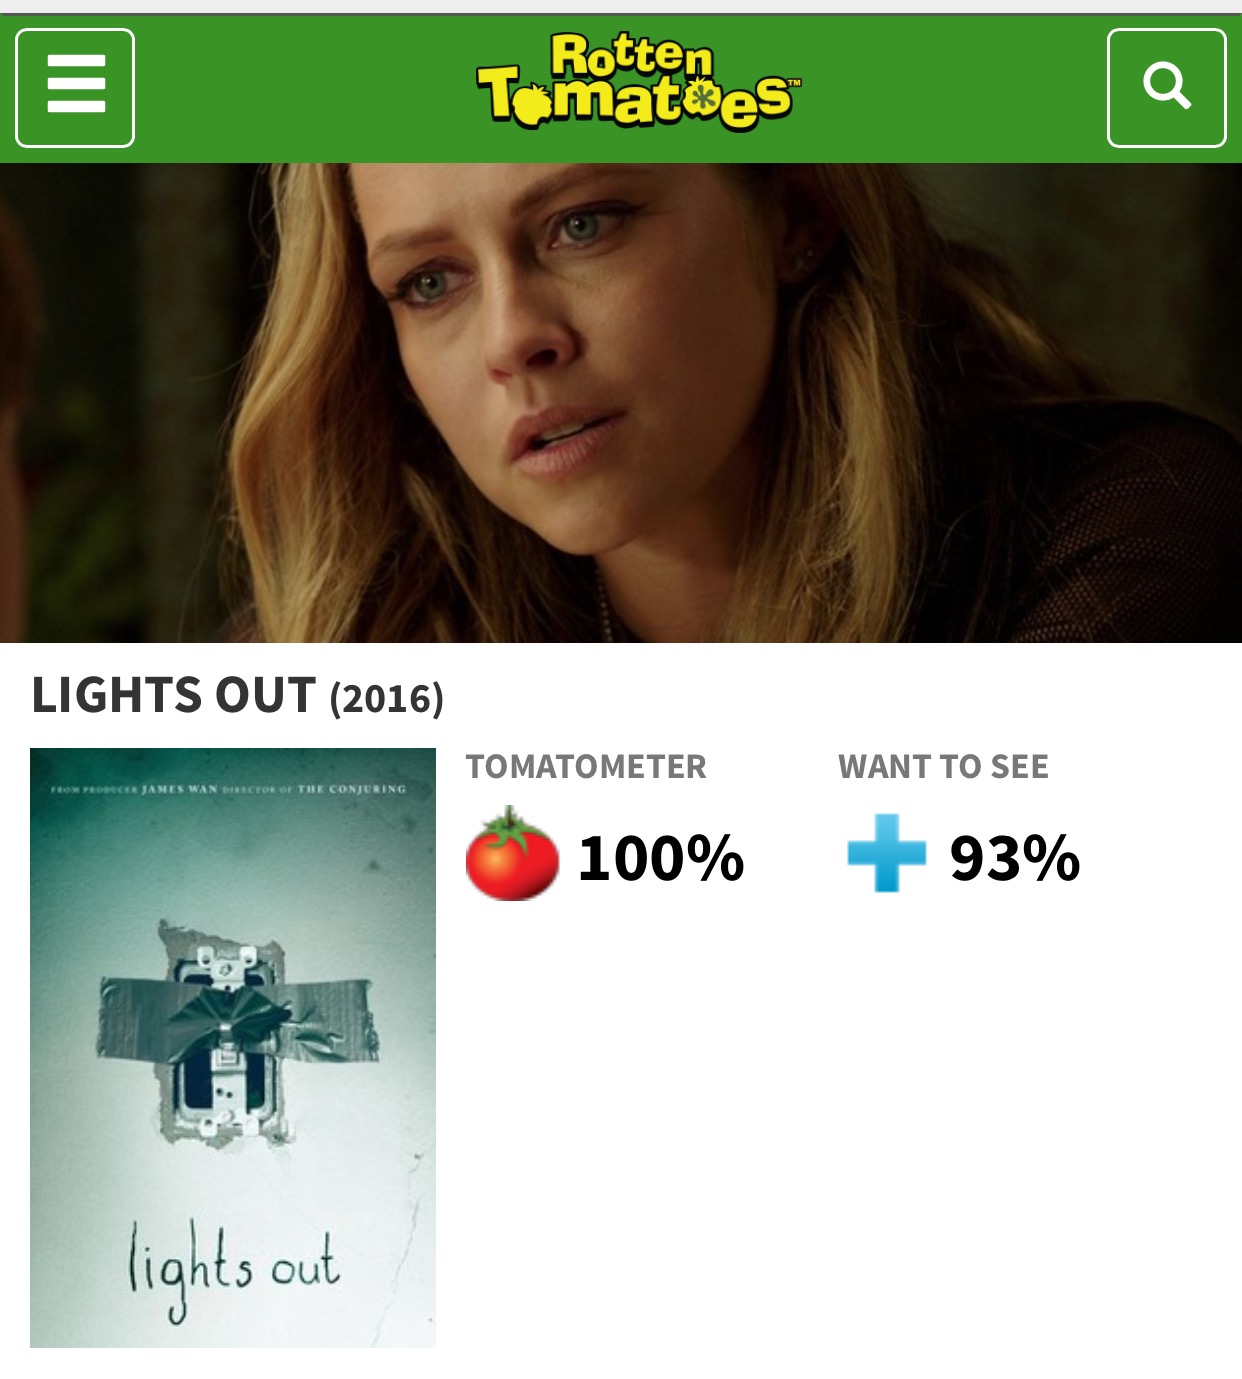 lights out rotten tomatotes